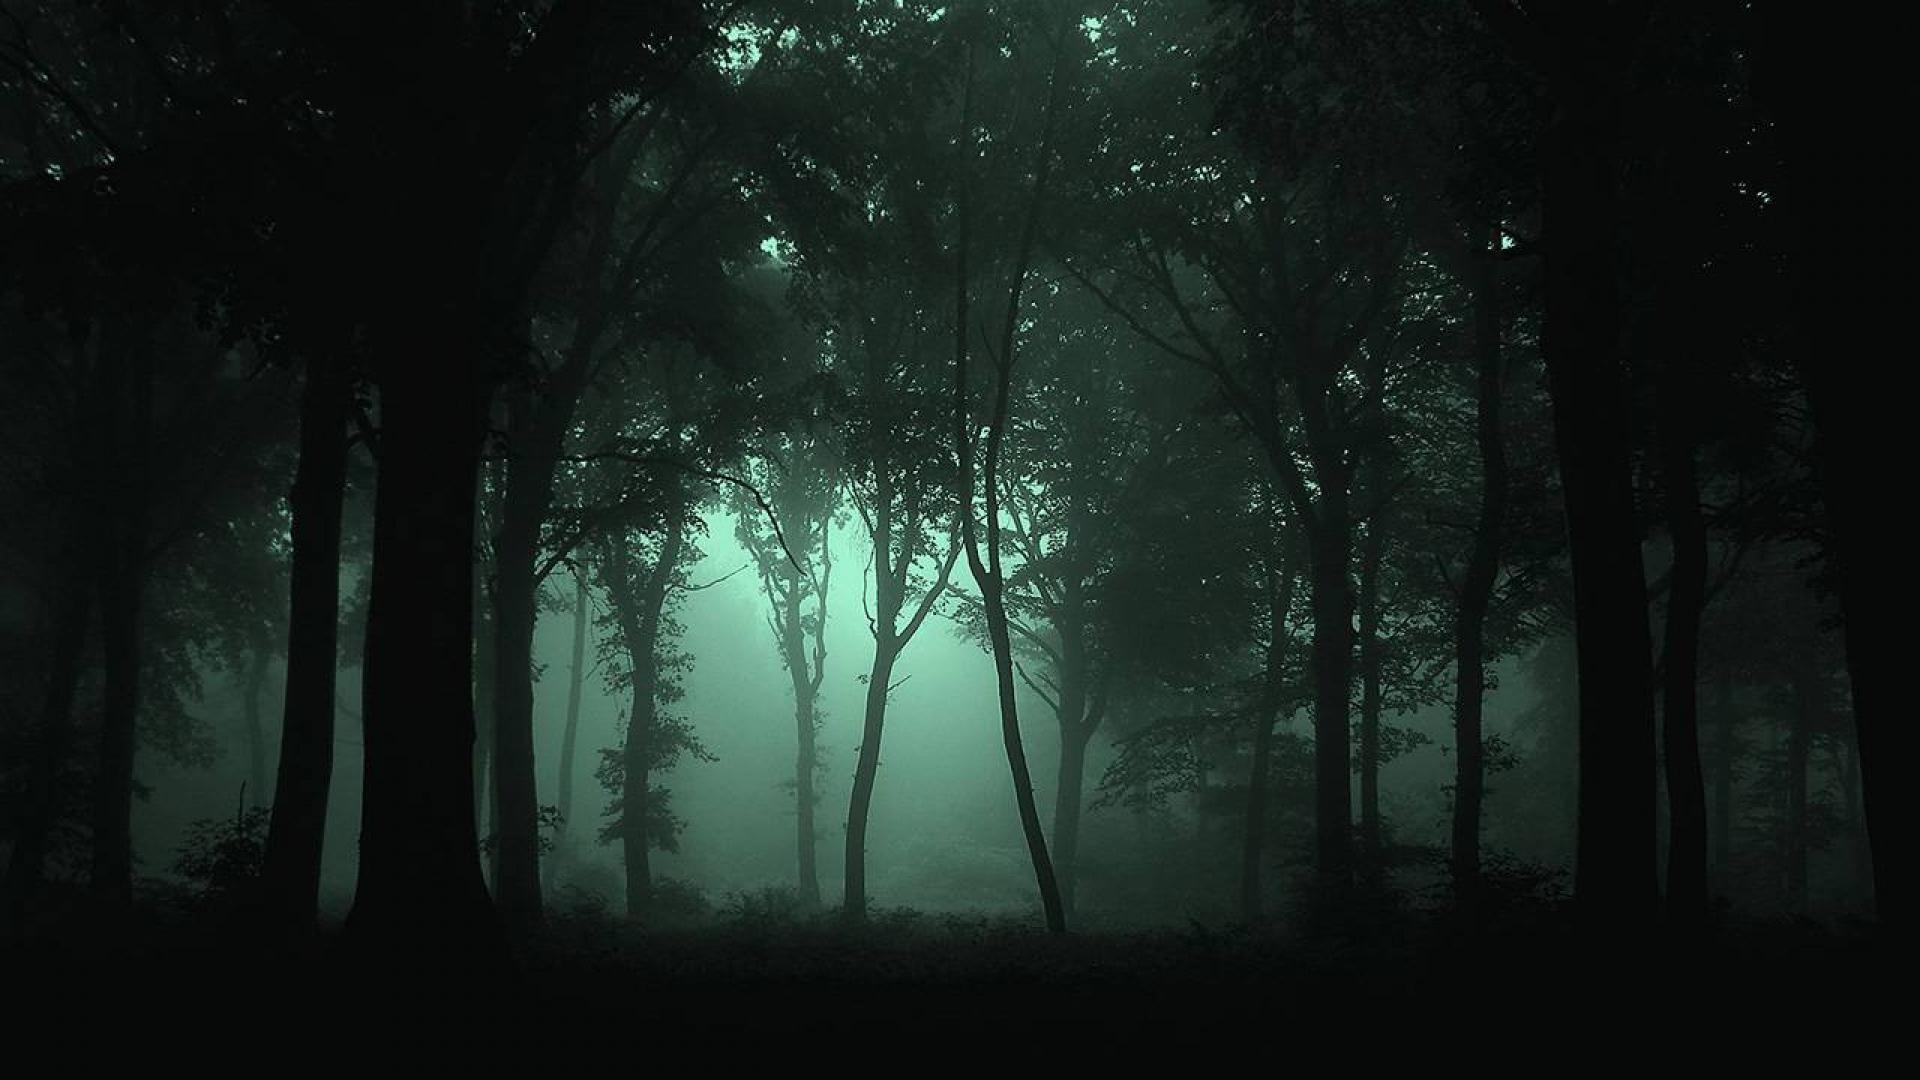 Dark Forest Wallpaper High Quality Resolution #VRJ. Earth in 2019